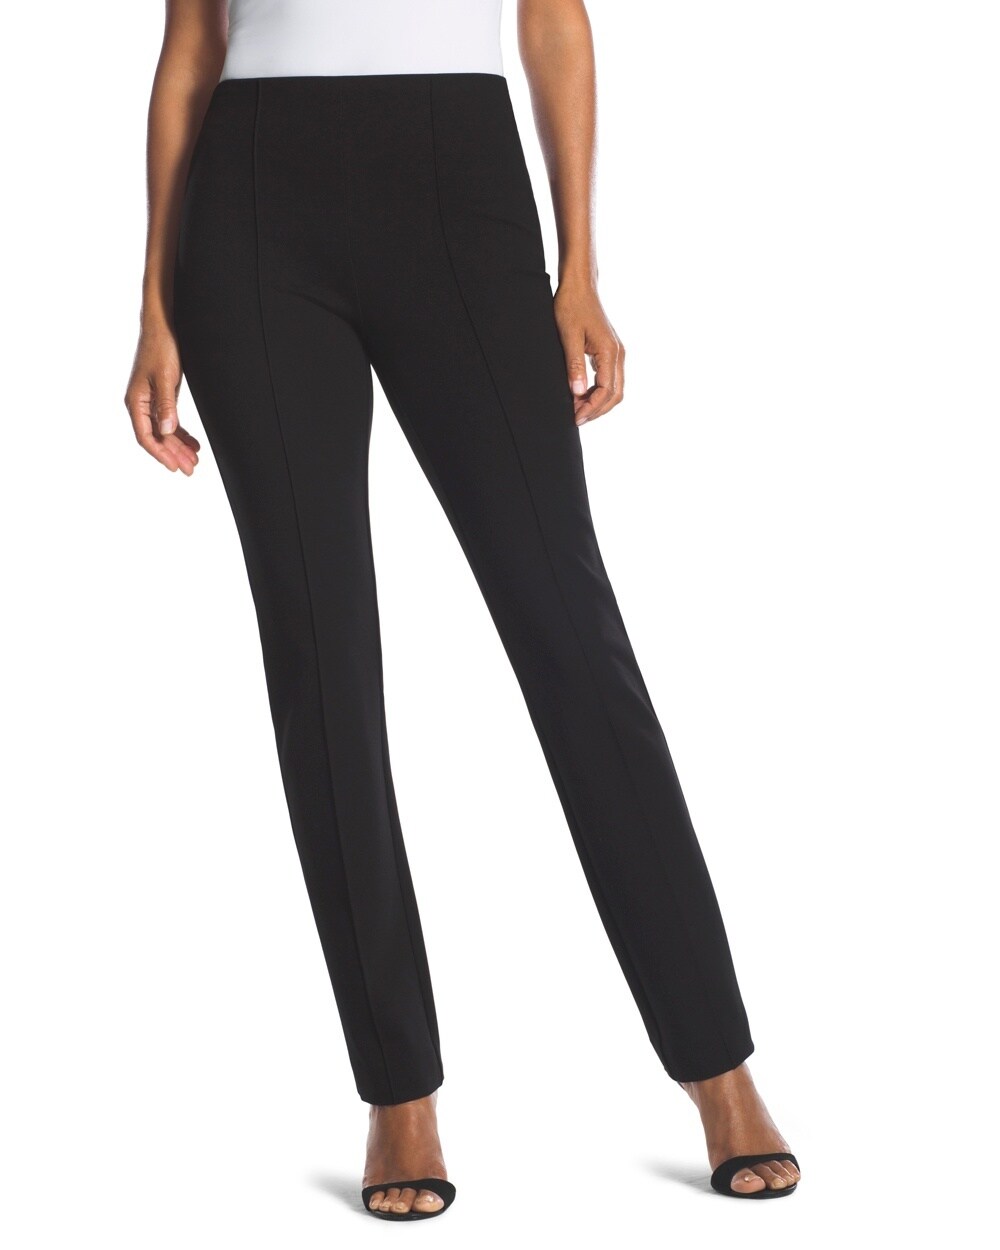 Lindy Side-Zip Pants Short Length - Chico's